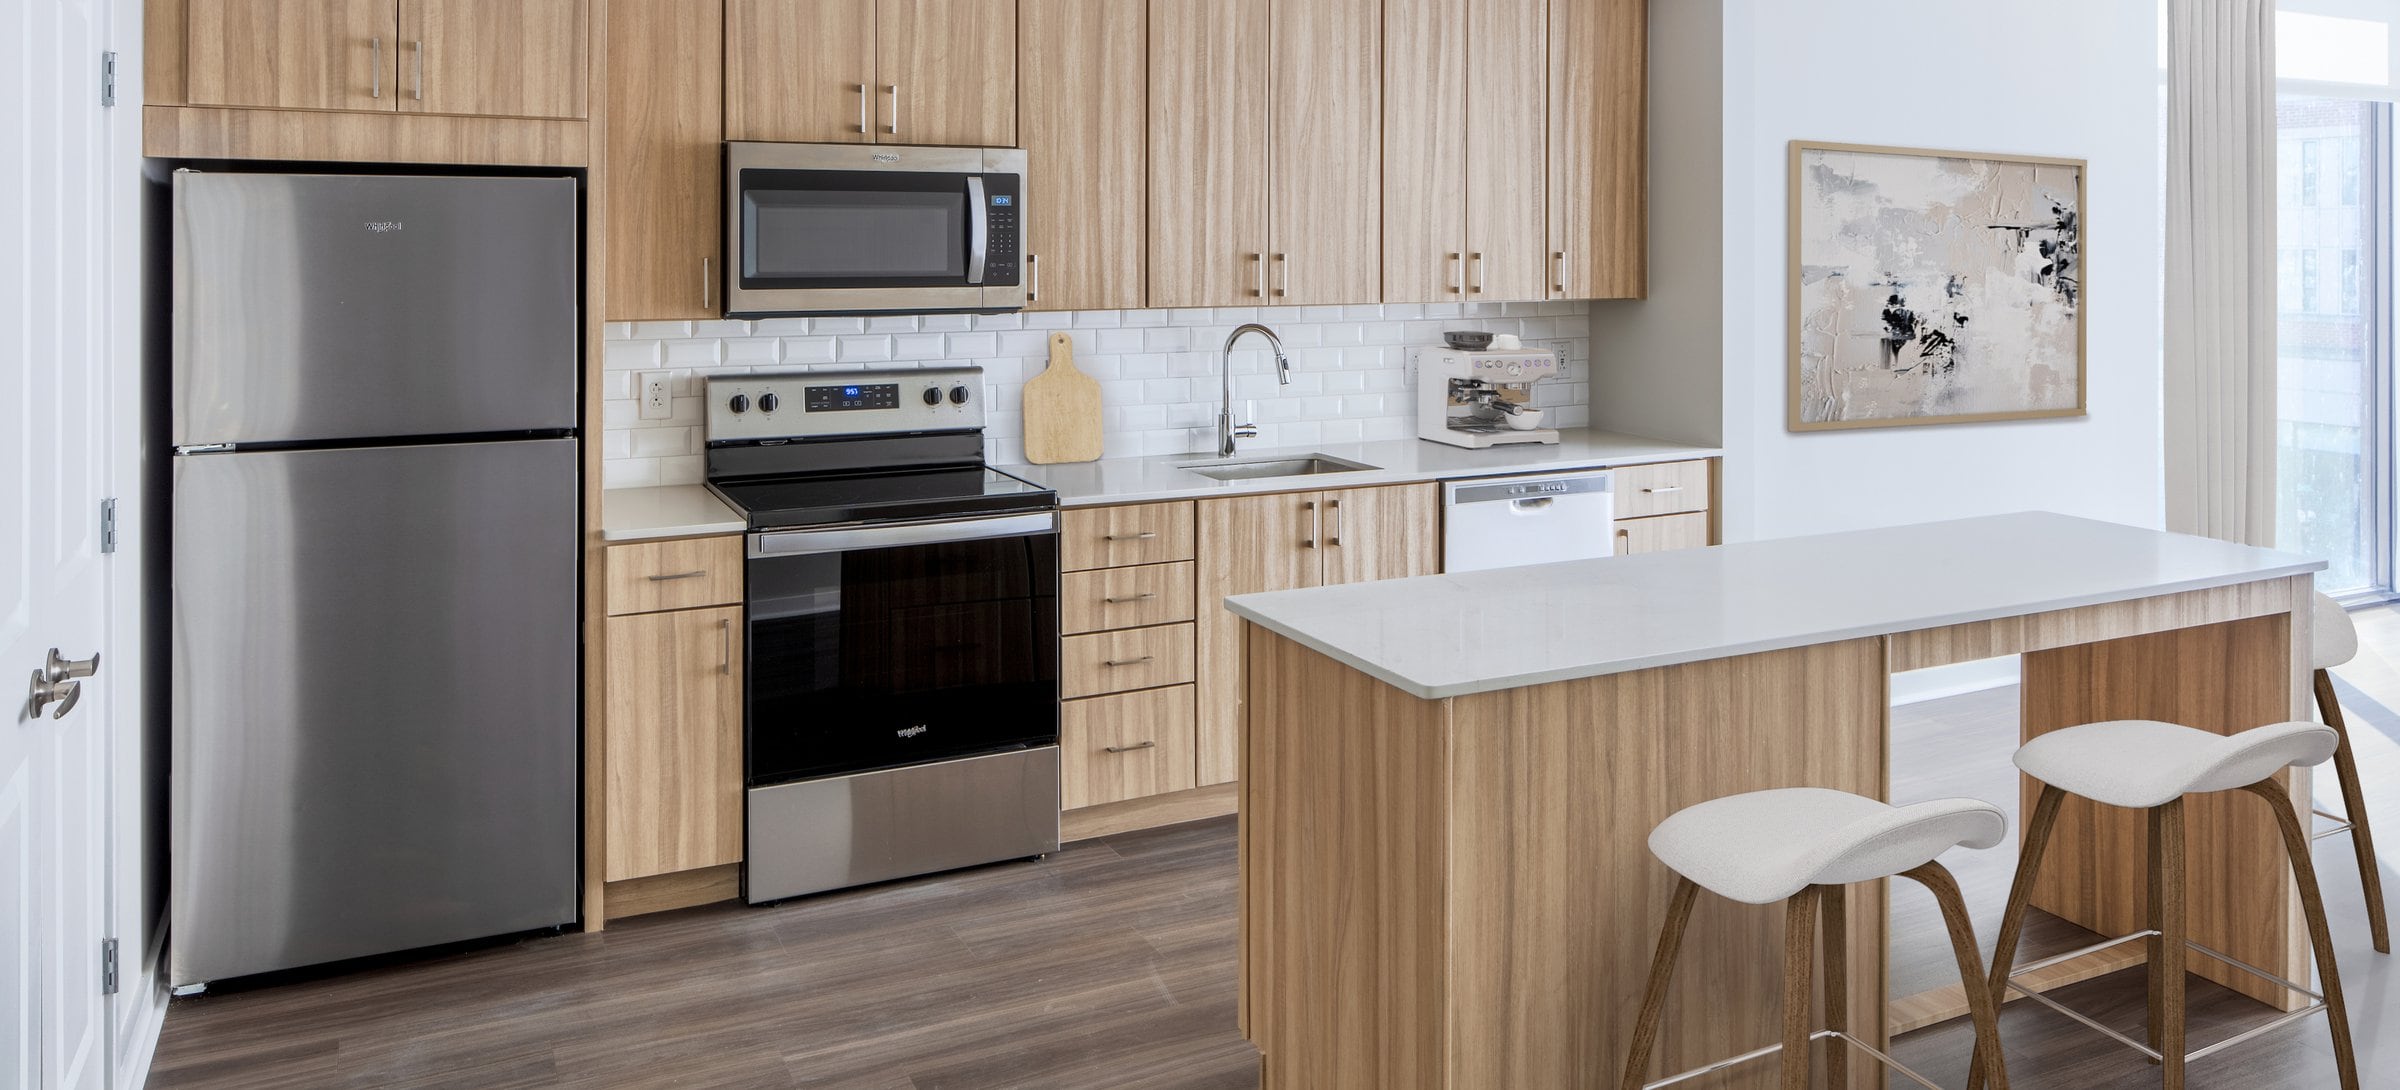 Brand new apartments with kitchens featuring oak cabinetry, white quartz countertops, and stainless steel appliances (Representative photo)